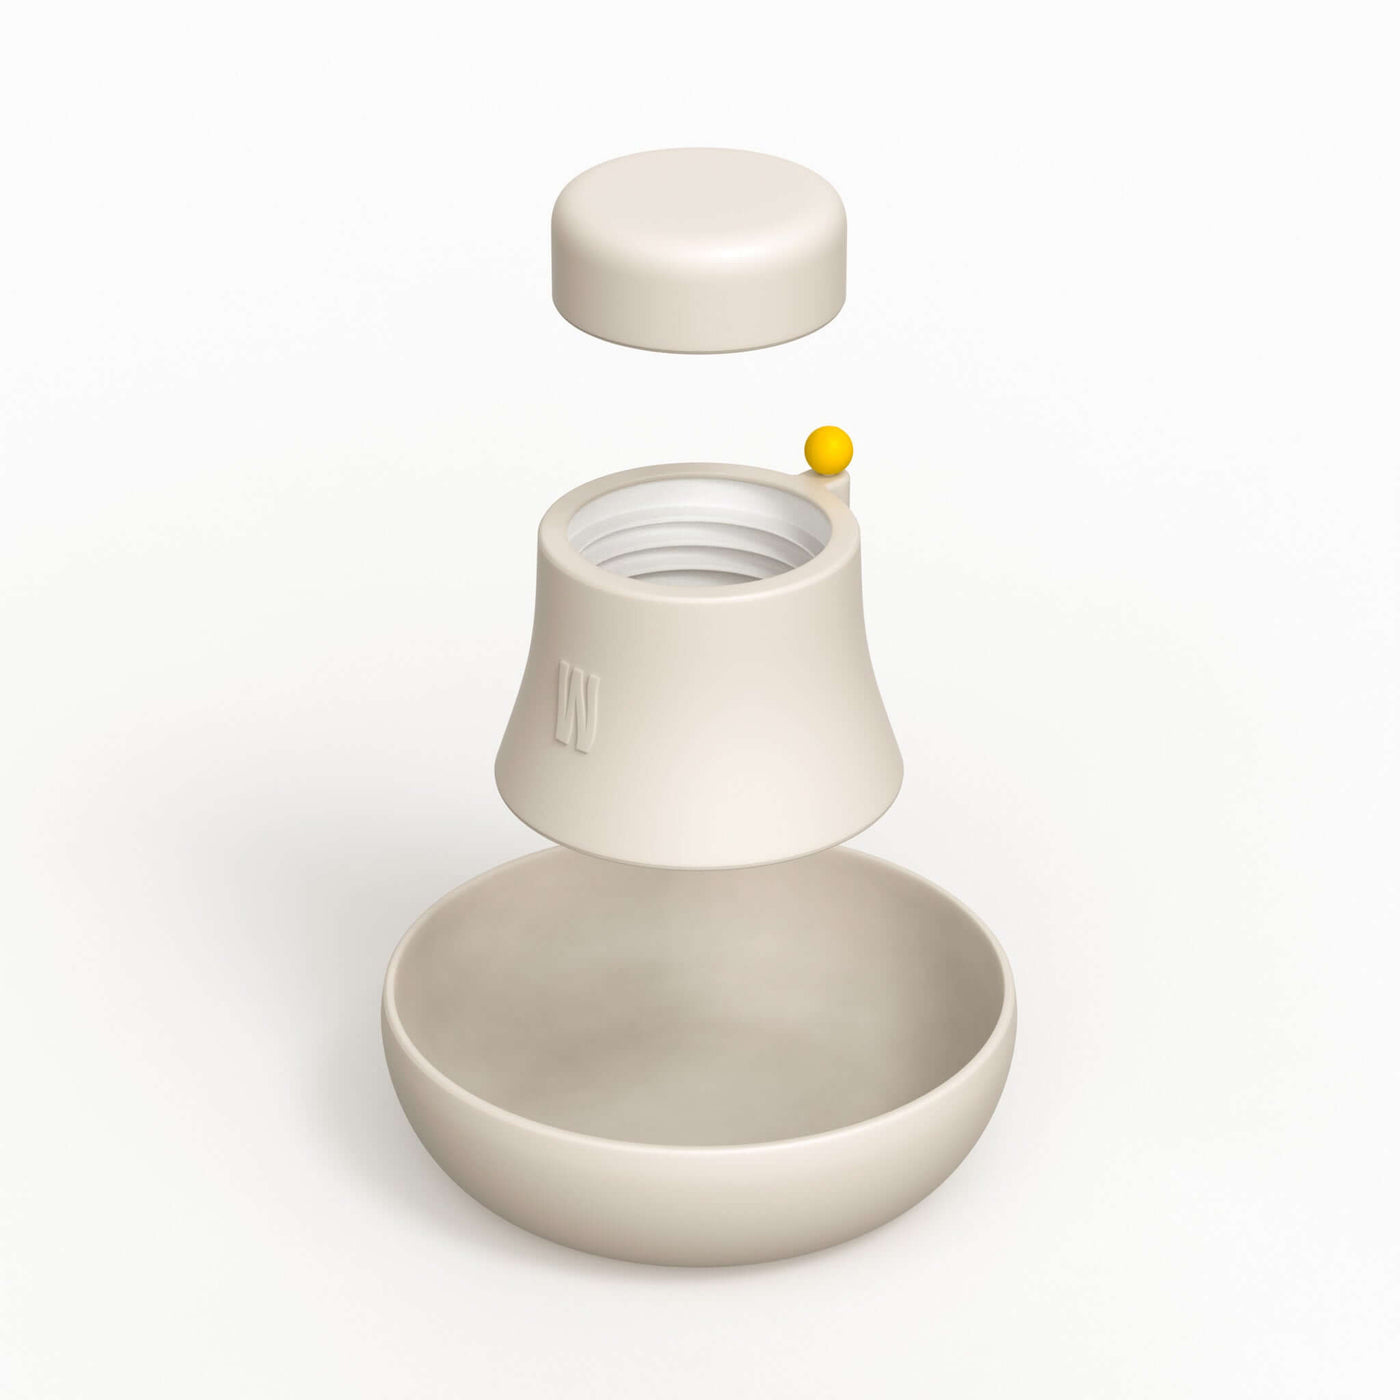 Rendered product photo of cream white silicone covers with a yellow poker.